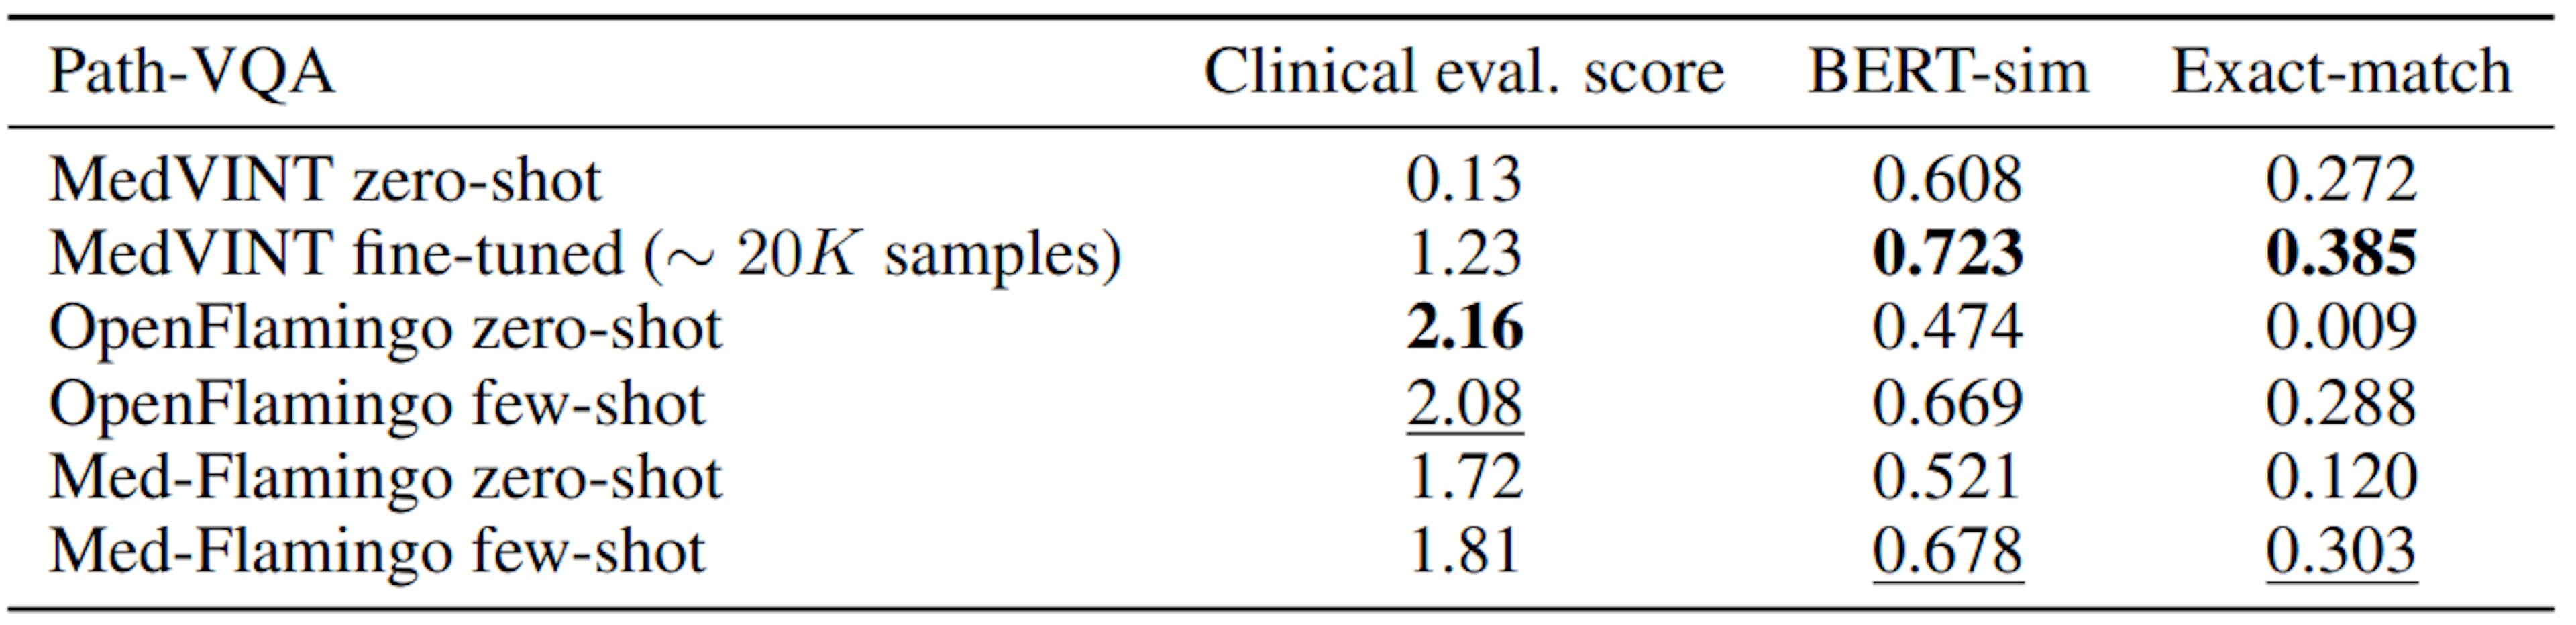 Table 2: Performance metrics on the PathVQA dataset. Best scores are shown in bold. Across models, this dataset showed lowest clinical performance among all evaluation datasets. This highlights a performance deficit in pathology across models, and demonstrates that previous classification-based metrics severely overestimated the performance of general medical VLMs in this specialty.